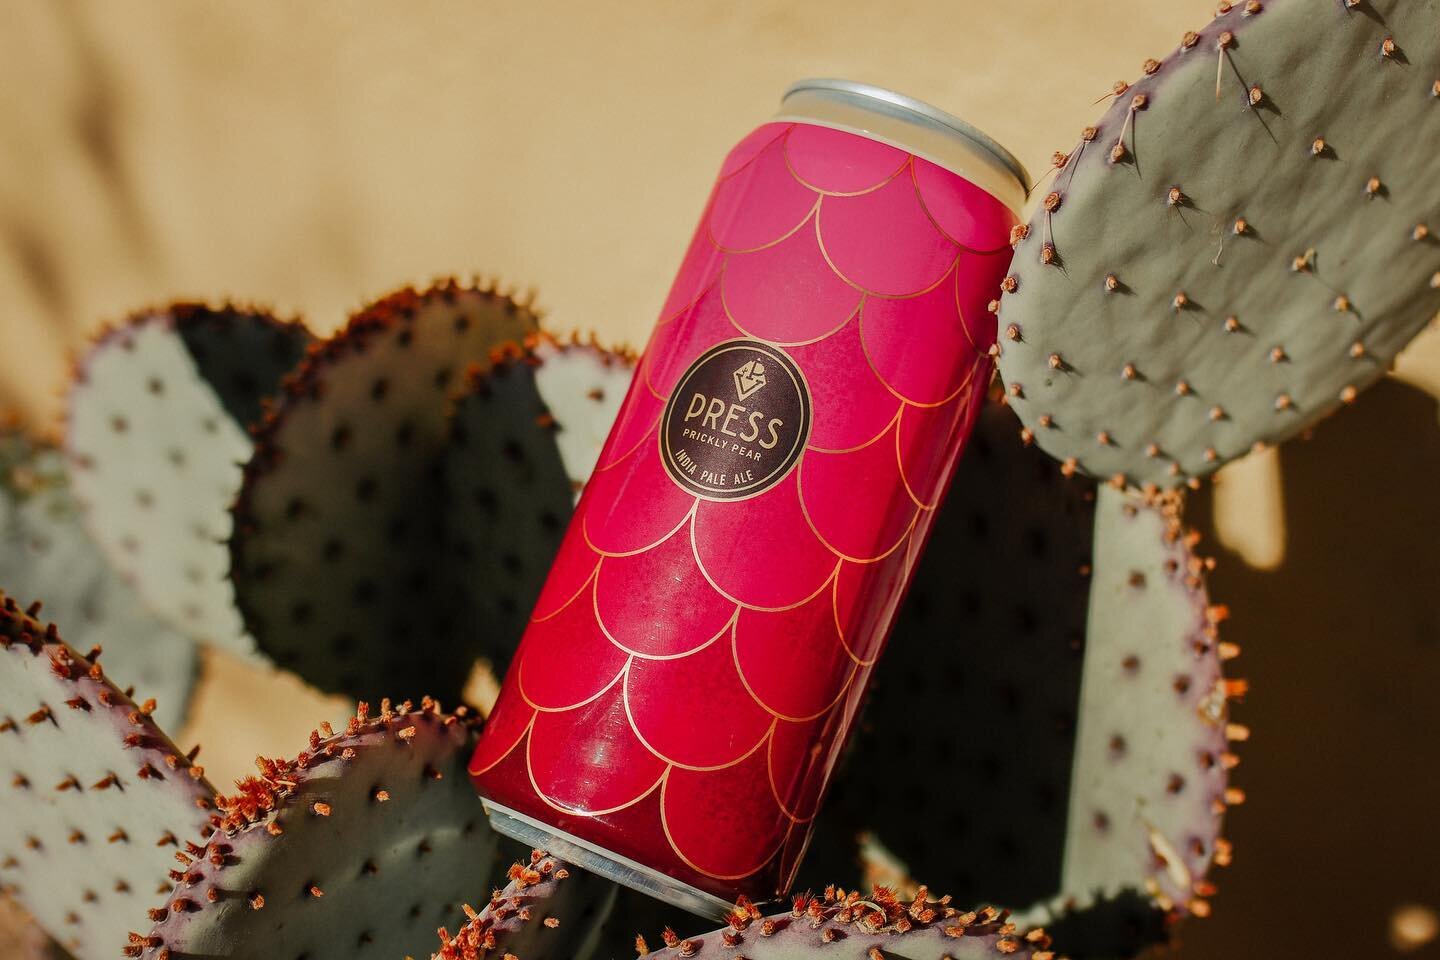 One of my favorite @pueblovida beers that truly embraces our corner of the world. They add prickly pear fruit post fermentation which gives this IPA a gorgeous pink tint. It also provides the beer with a slightly fruity watermelon taste. Mmm.